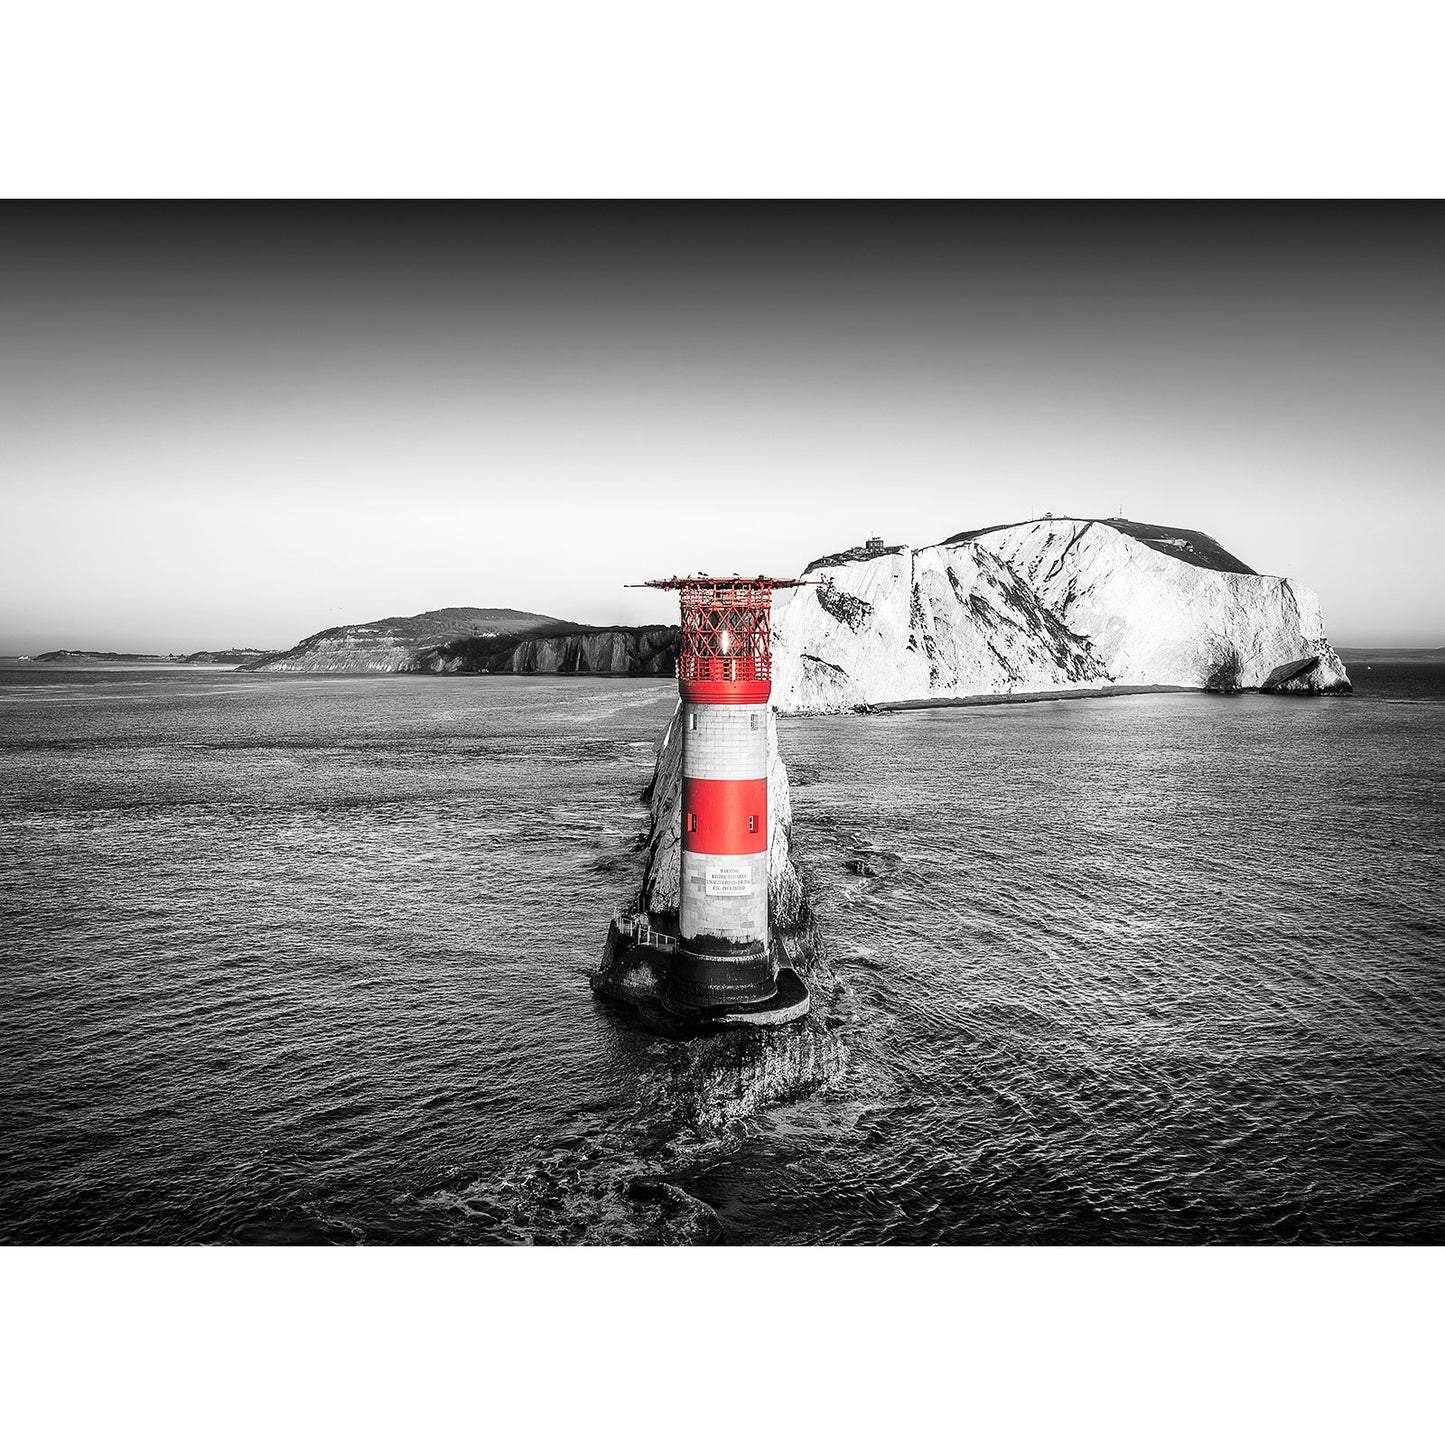 A monochrome image highlighting The Needles lighthouse in the sea with a chalky cliff in the background on the Isle of Gascoigne, captured by Available Light Photography.